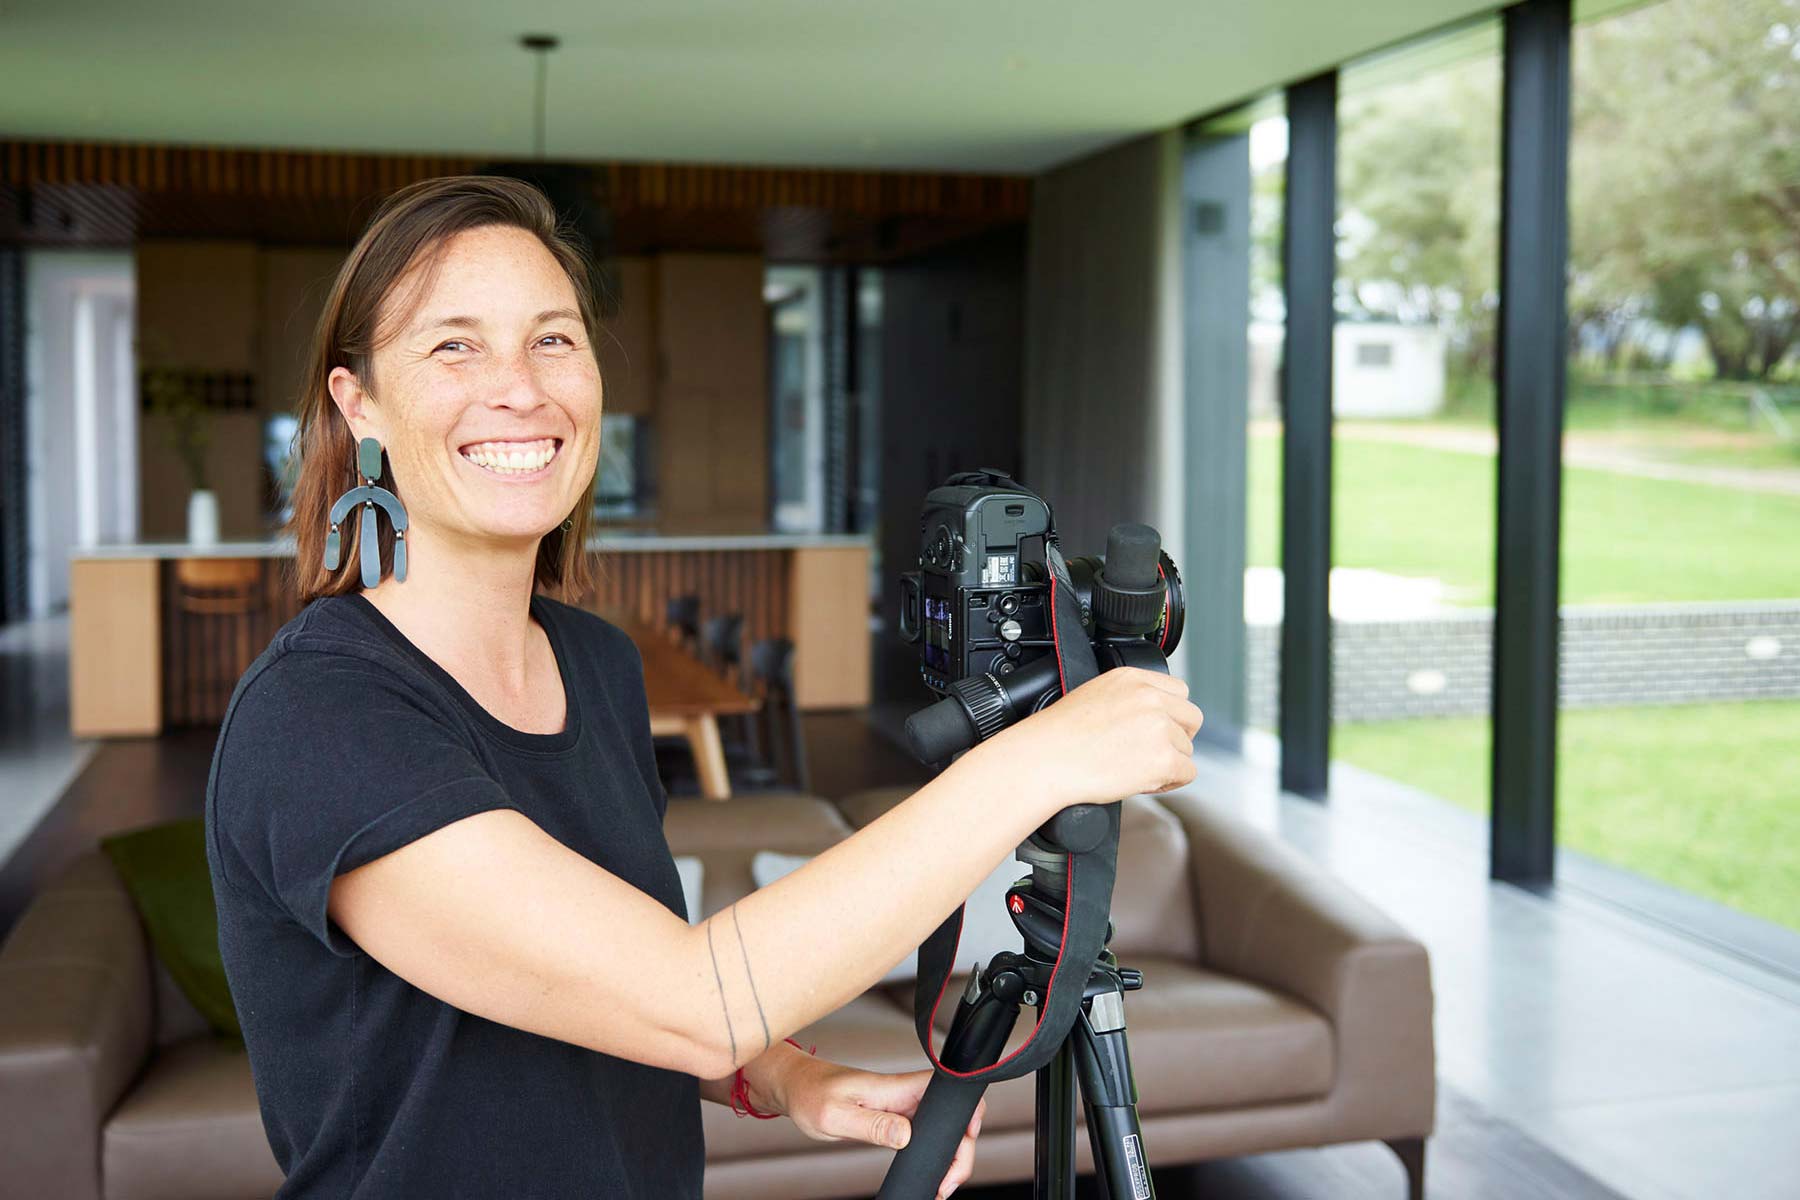 Bo with her professional camera set up in a modern architectural home